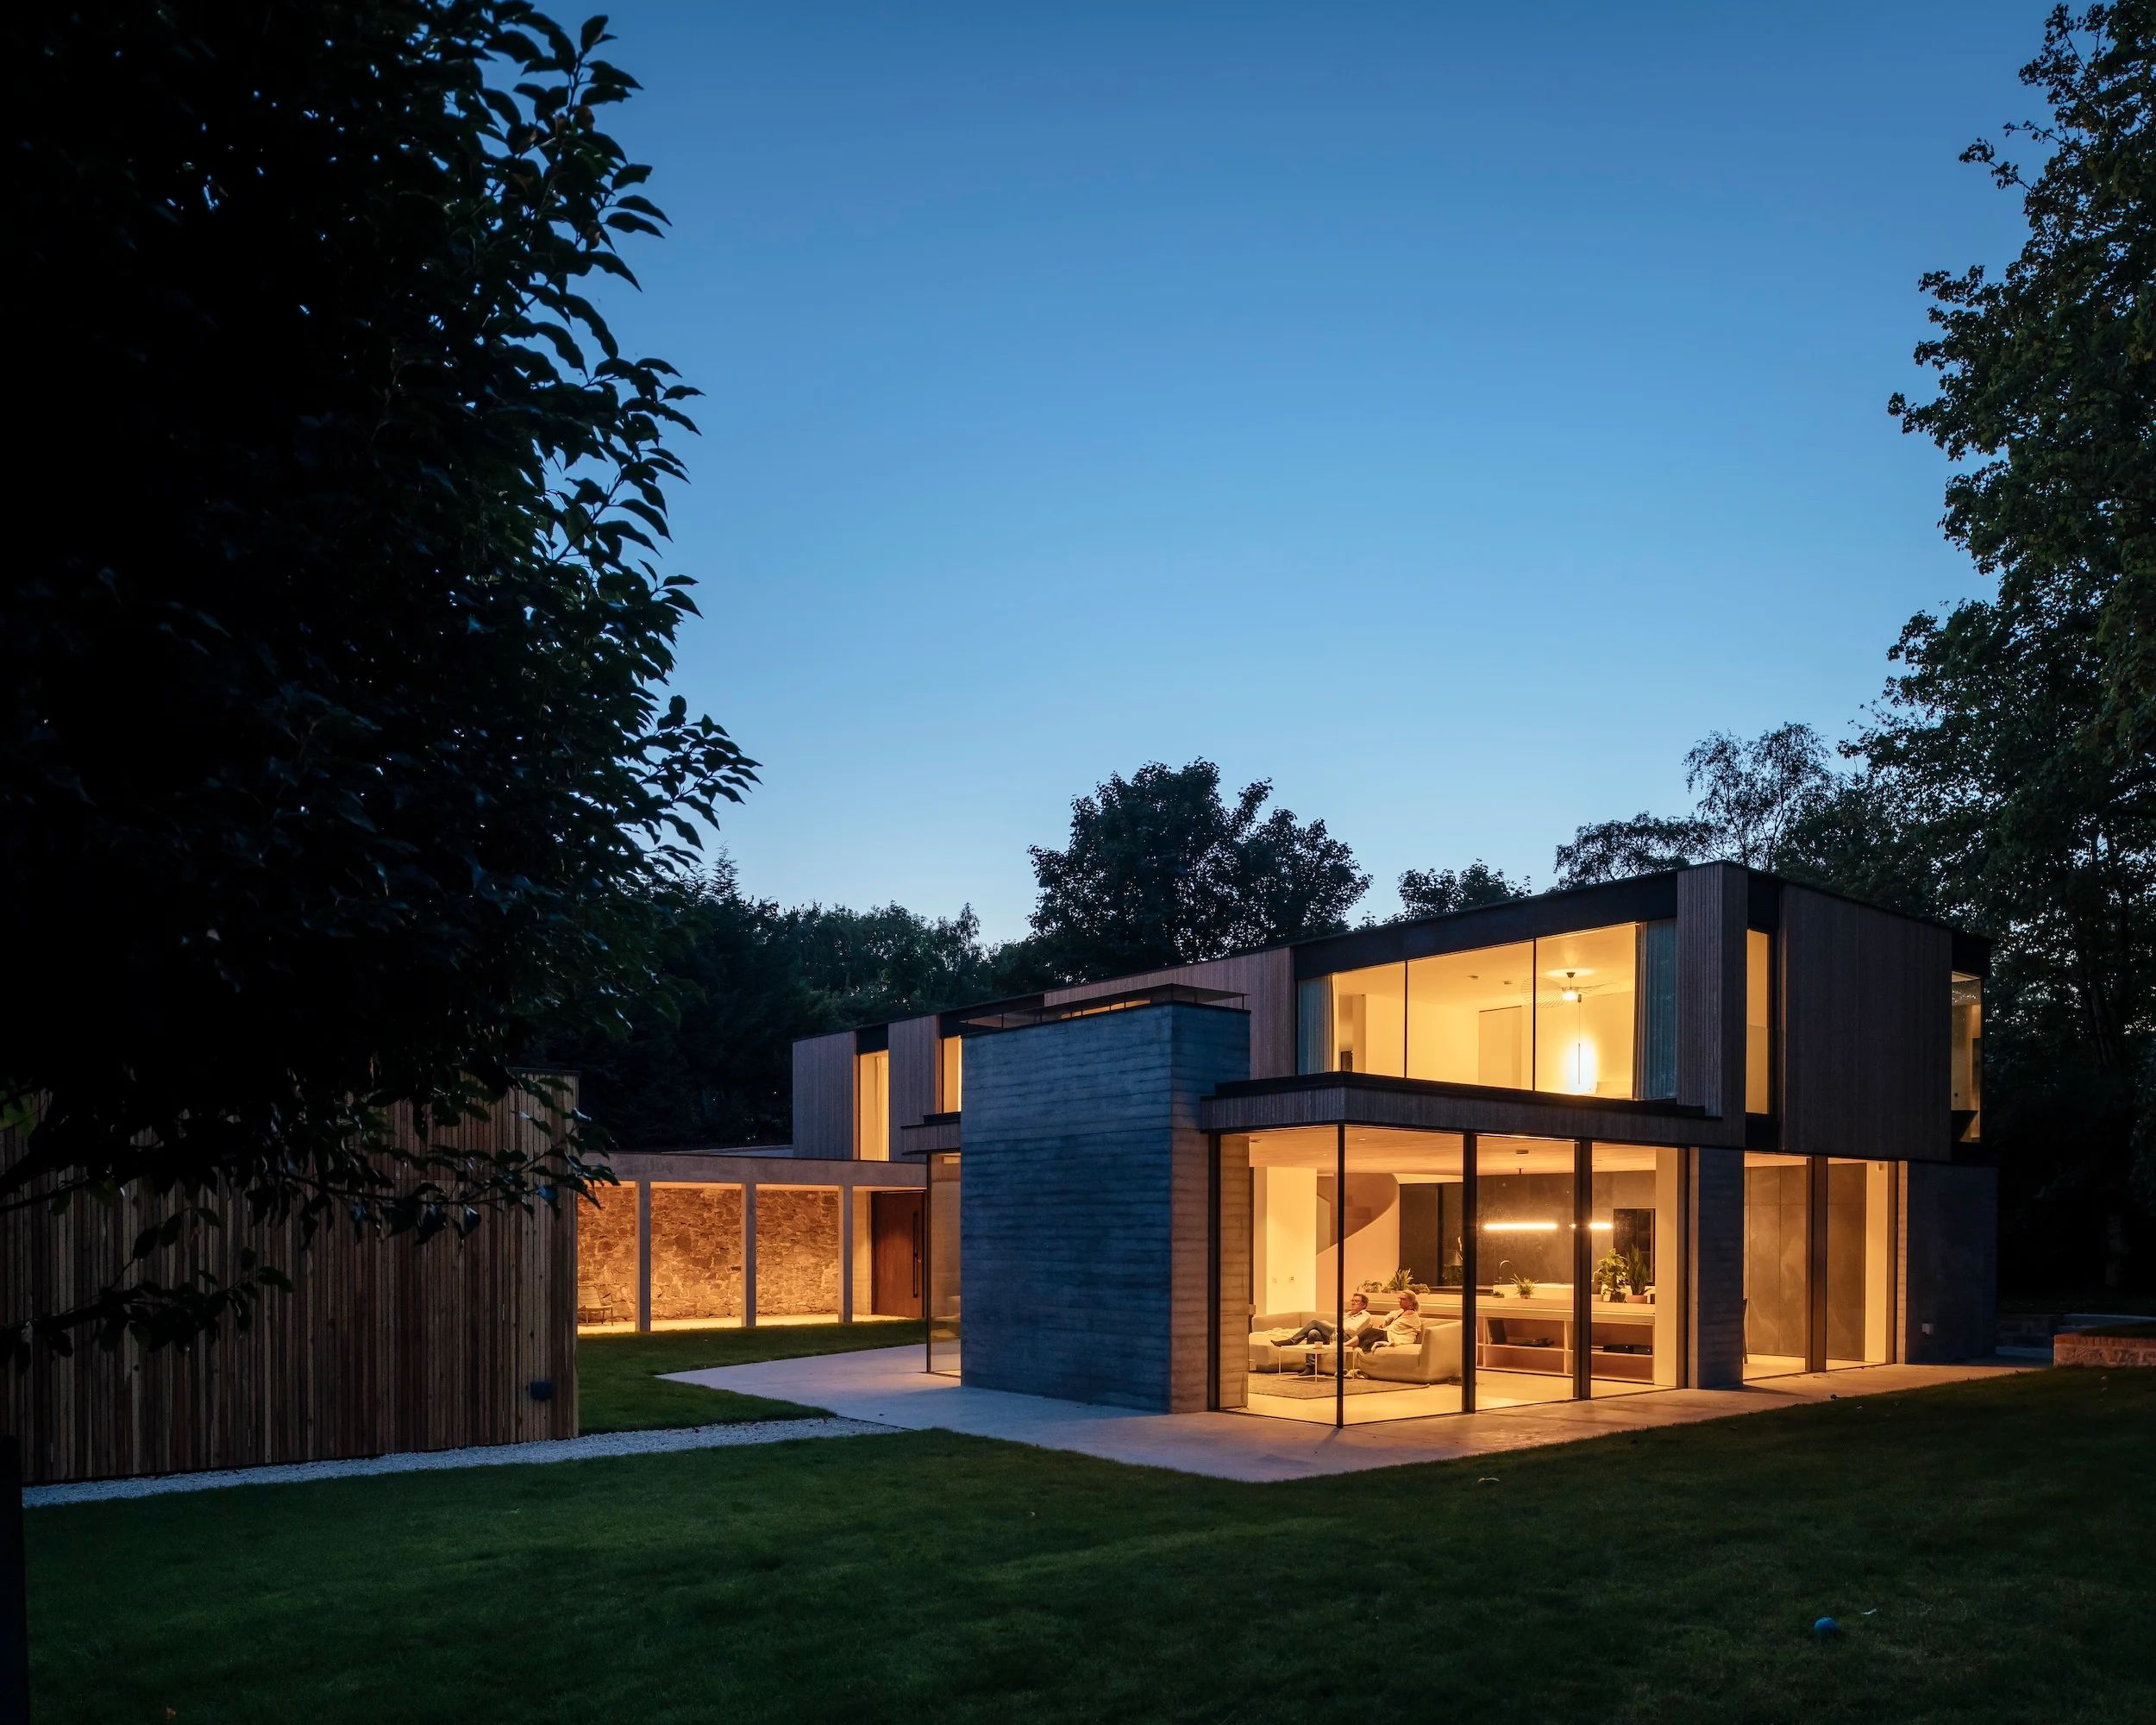 The Arbor House in Aberdeen, UK by Brown & Brown Architects